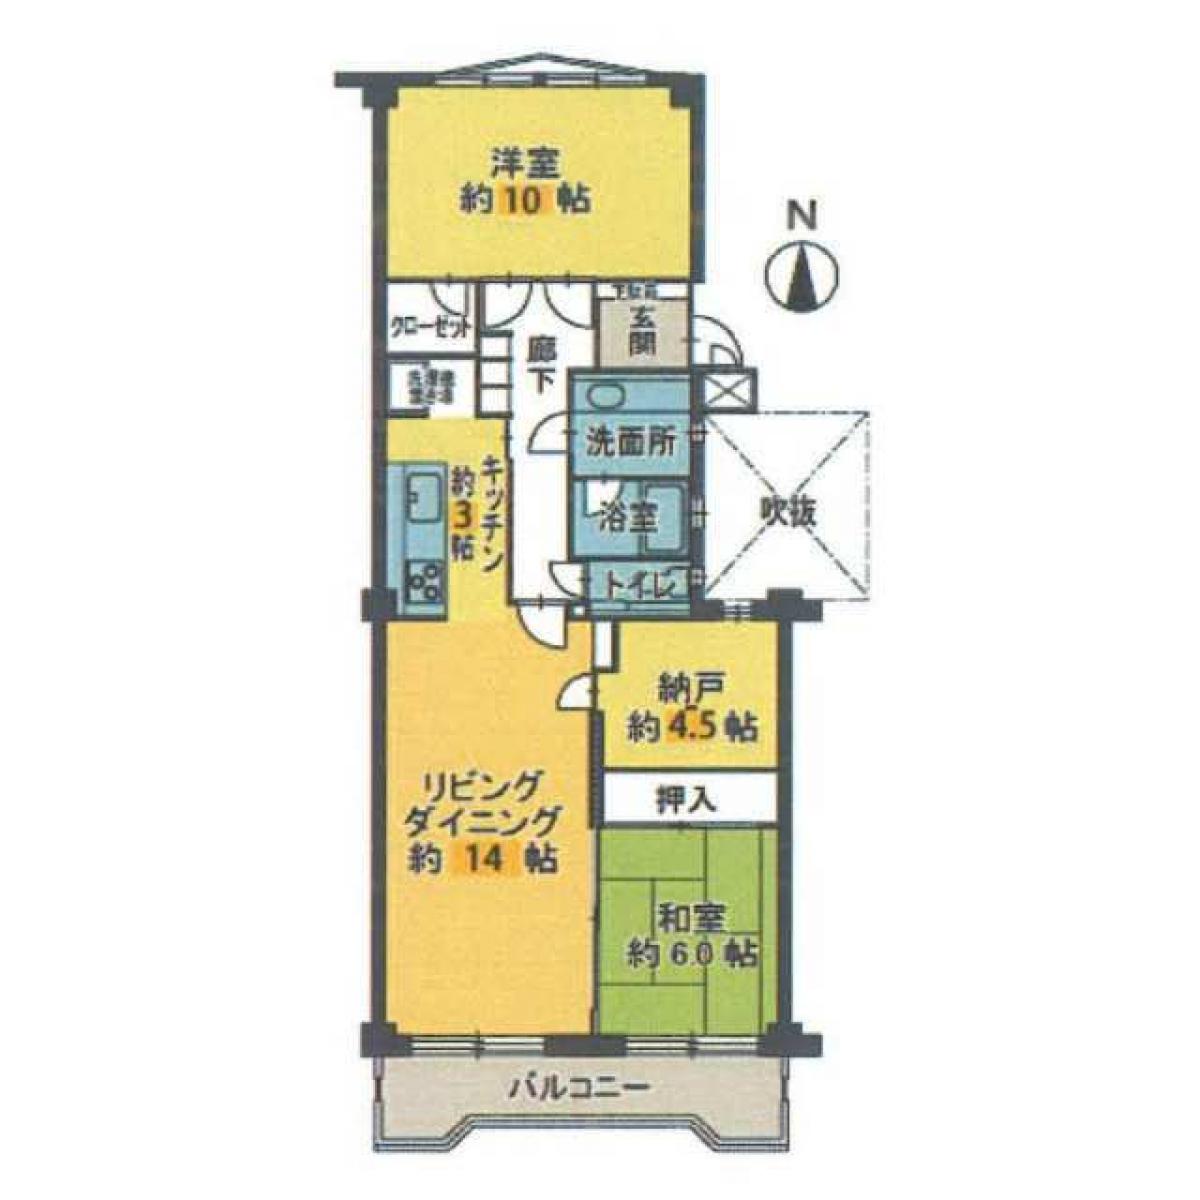 Picture of Apartment For Sale in Nagoya Shi Chikusa Ku, Aichi, Japan